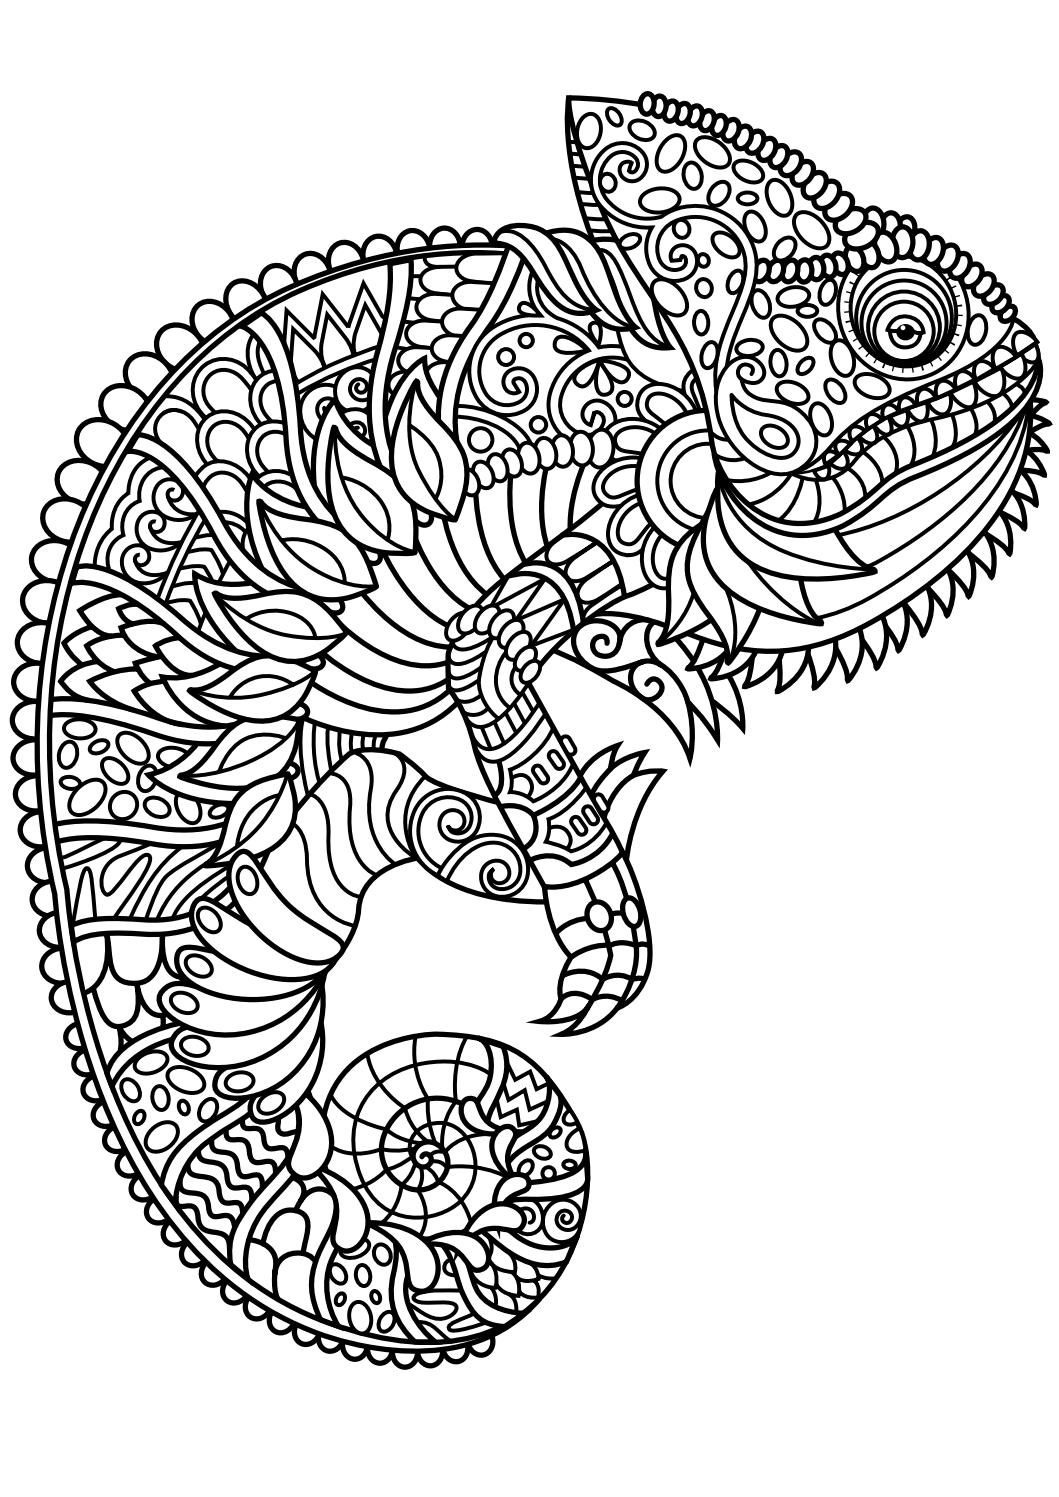 Animal Coloring Pages Pdf   Free Adult Coloring Pages, Animal ...